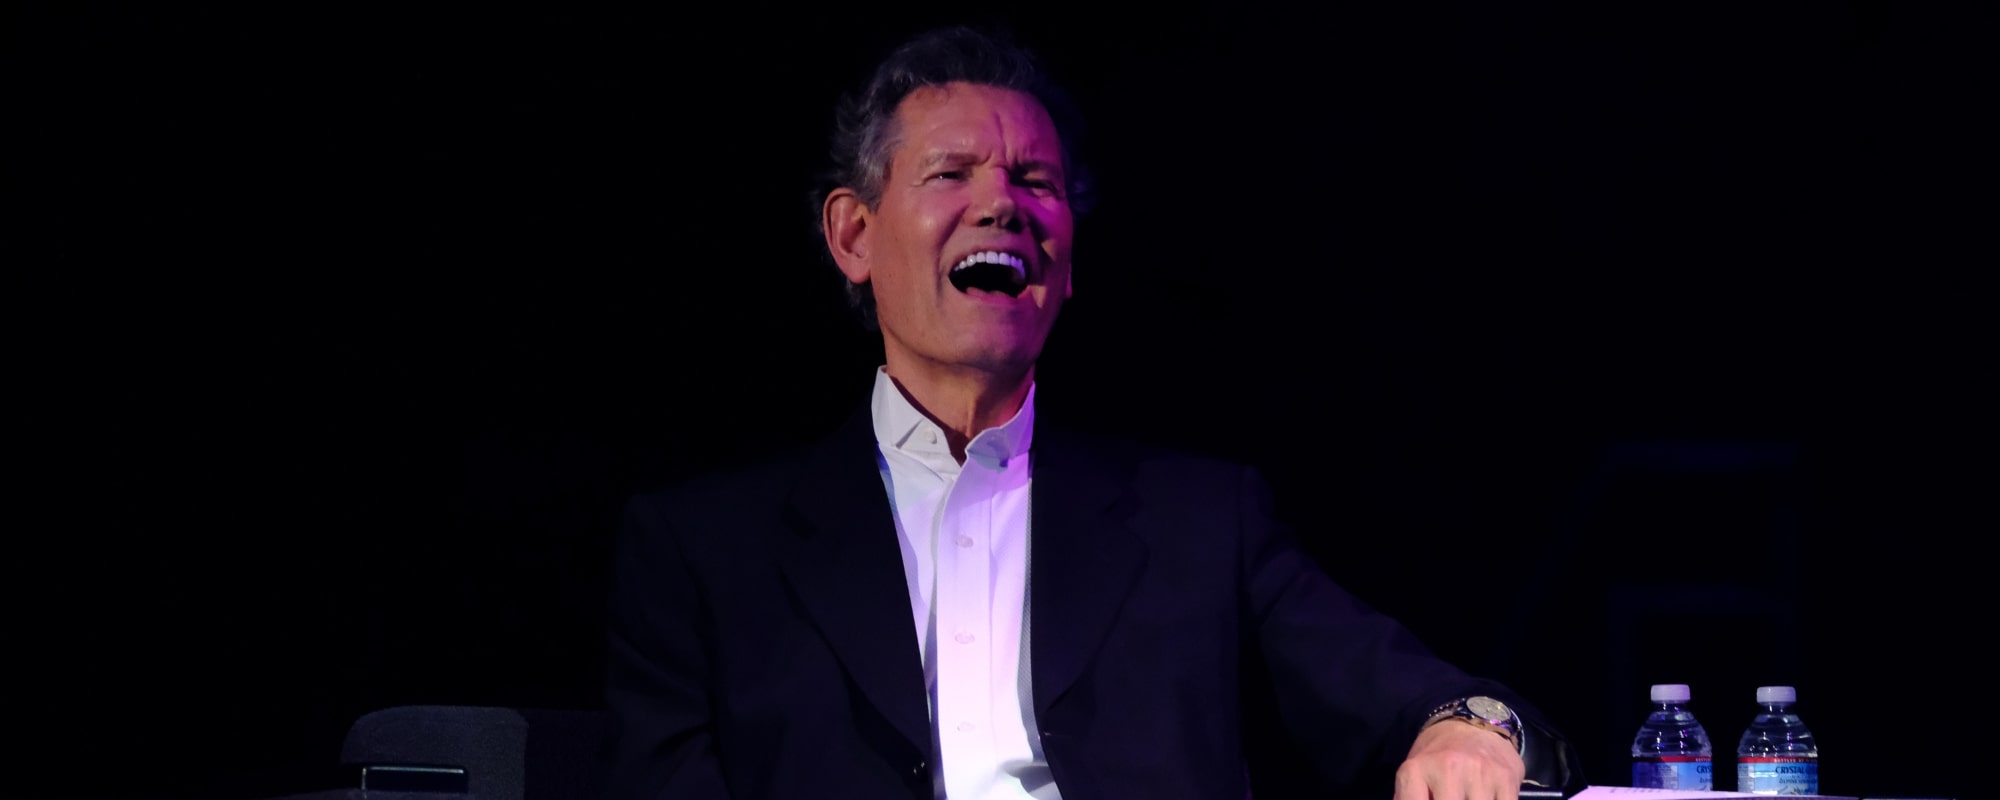 Randy Travis Announces His First “Brand New Studio Recording” Since His Near-Fatal Stroke in 2013